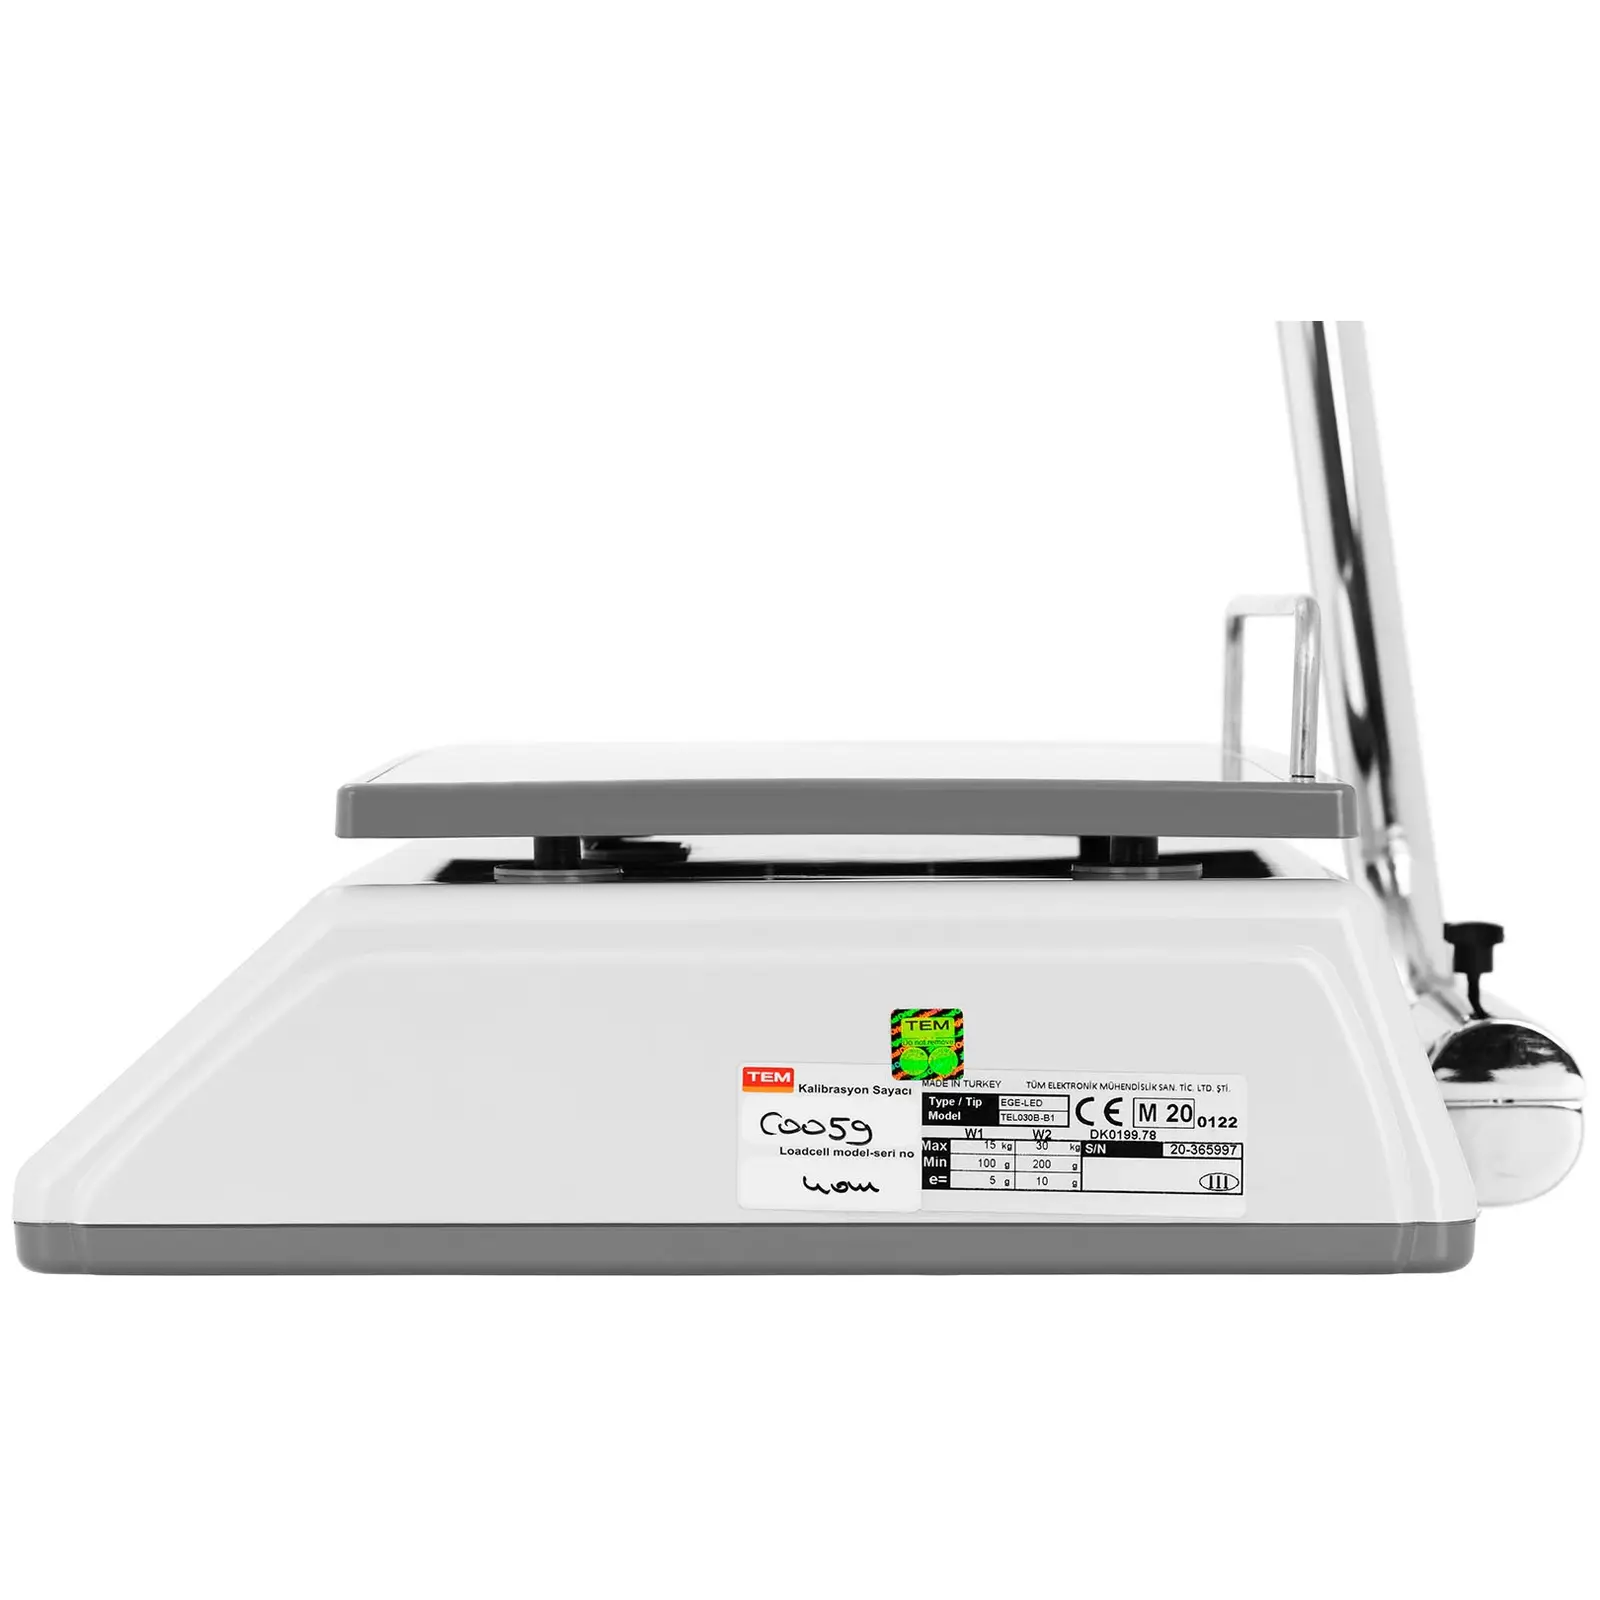 Price Scale - calibrated - 30 kg - dual LED